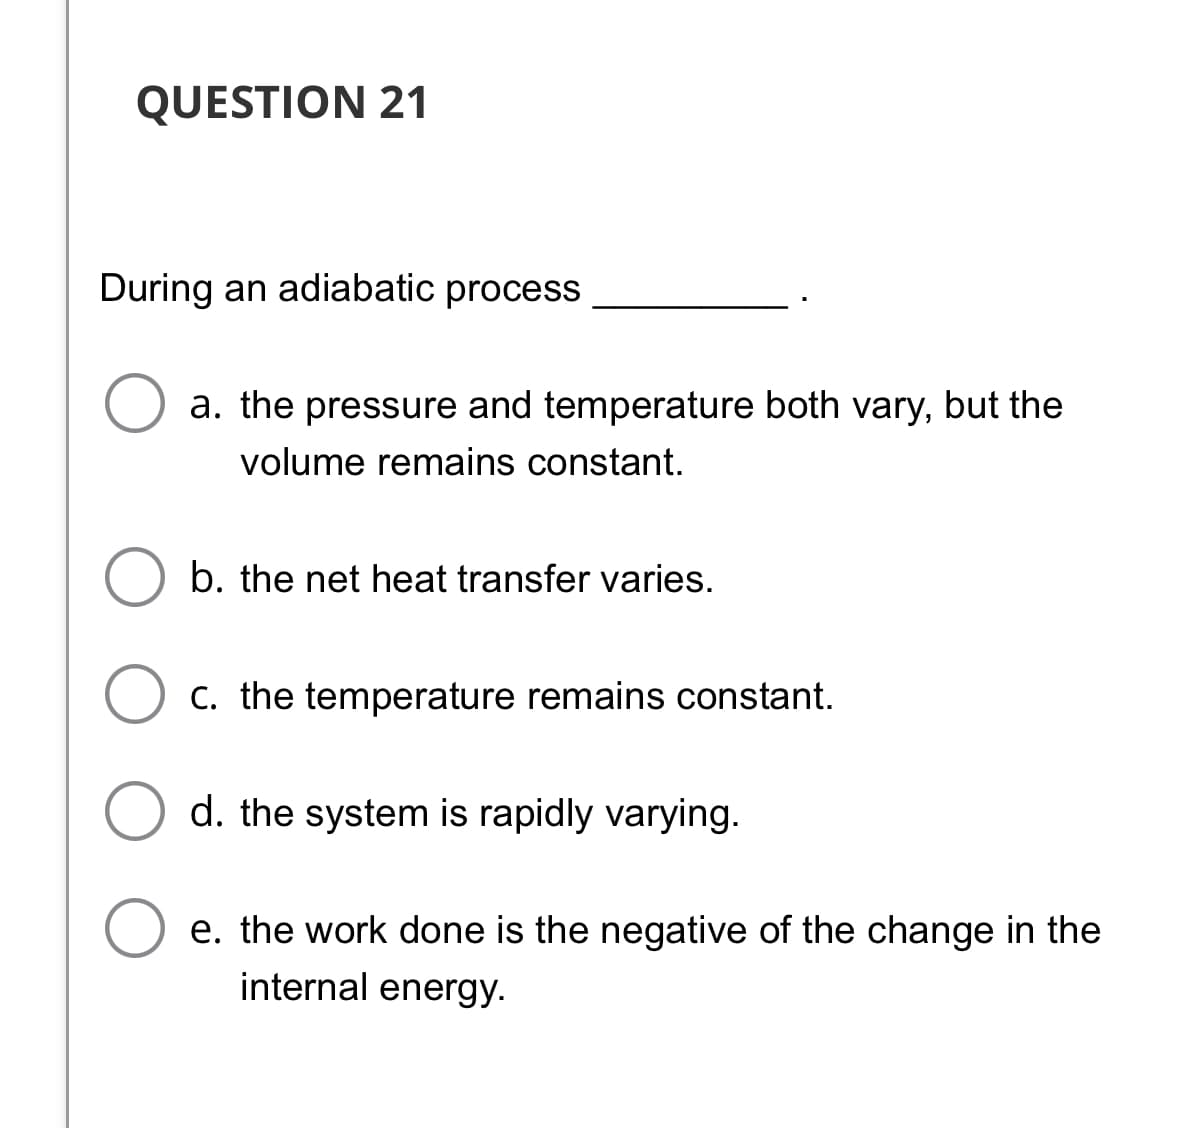 QUESTION 21
During an adiabatic process
a. the pressure and temperature both vary, but the
volume remains constant.
b. the net heat transfer varies.
C. the temperature remains constant.
d. the system is rapidly varying.
e. the work done is the negative of the change in the
internal energy.
